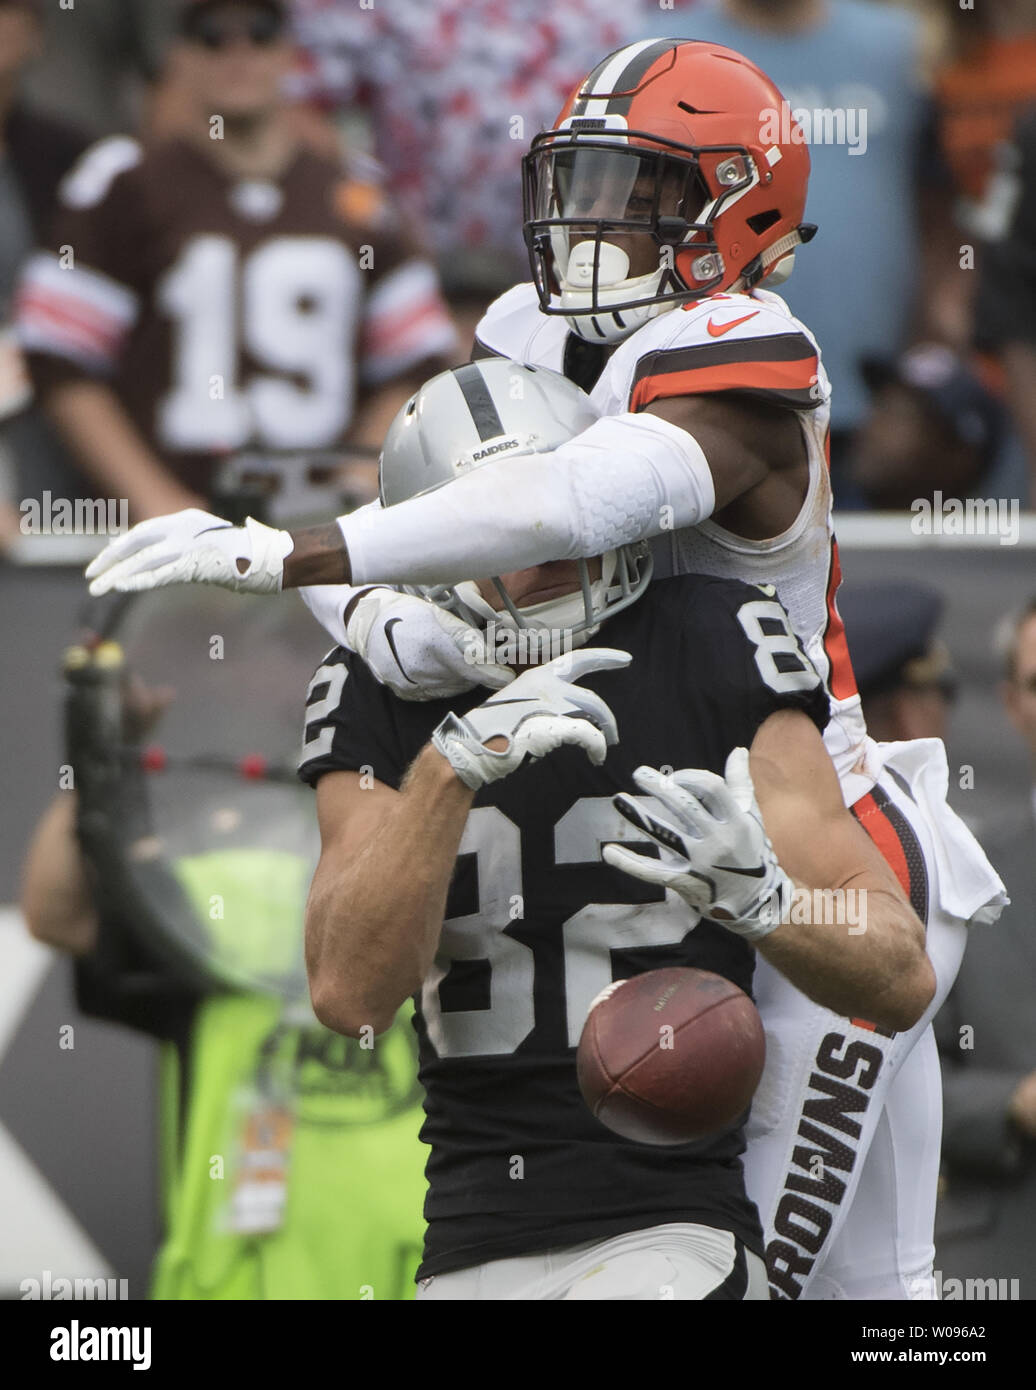 Cleveland Browns Denzel Ward breaks up a Derek Carr pass to Oakland Raiders Jordy Nelson (82)in the fourth quarter at the Coliseum in Oakland, California on September 30, 2018. The Raiders defeated the Browns 45-42 in overtime.     Photo by Terry Schmitt/UPI Stock Photo